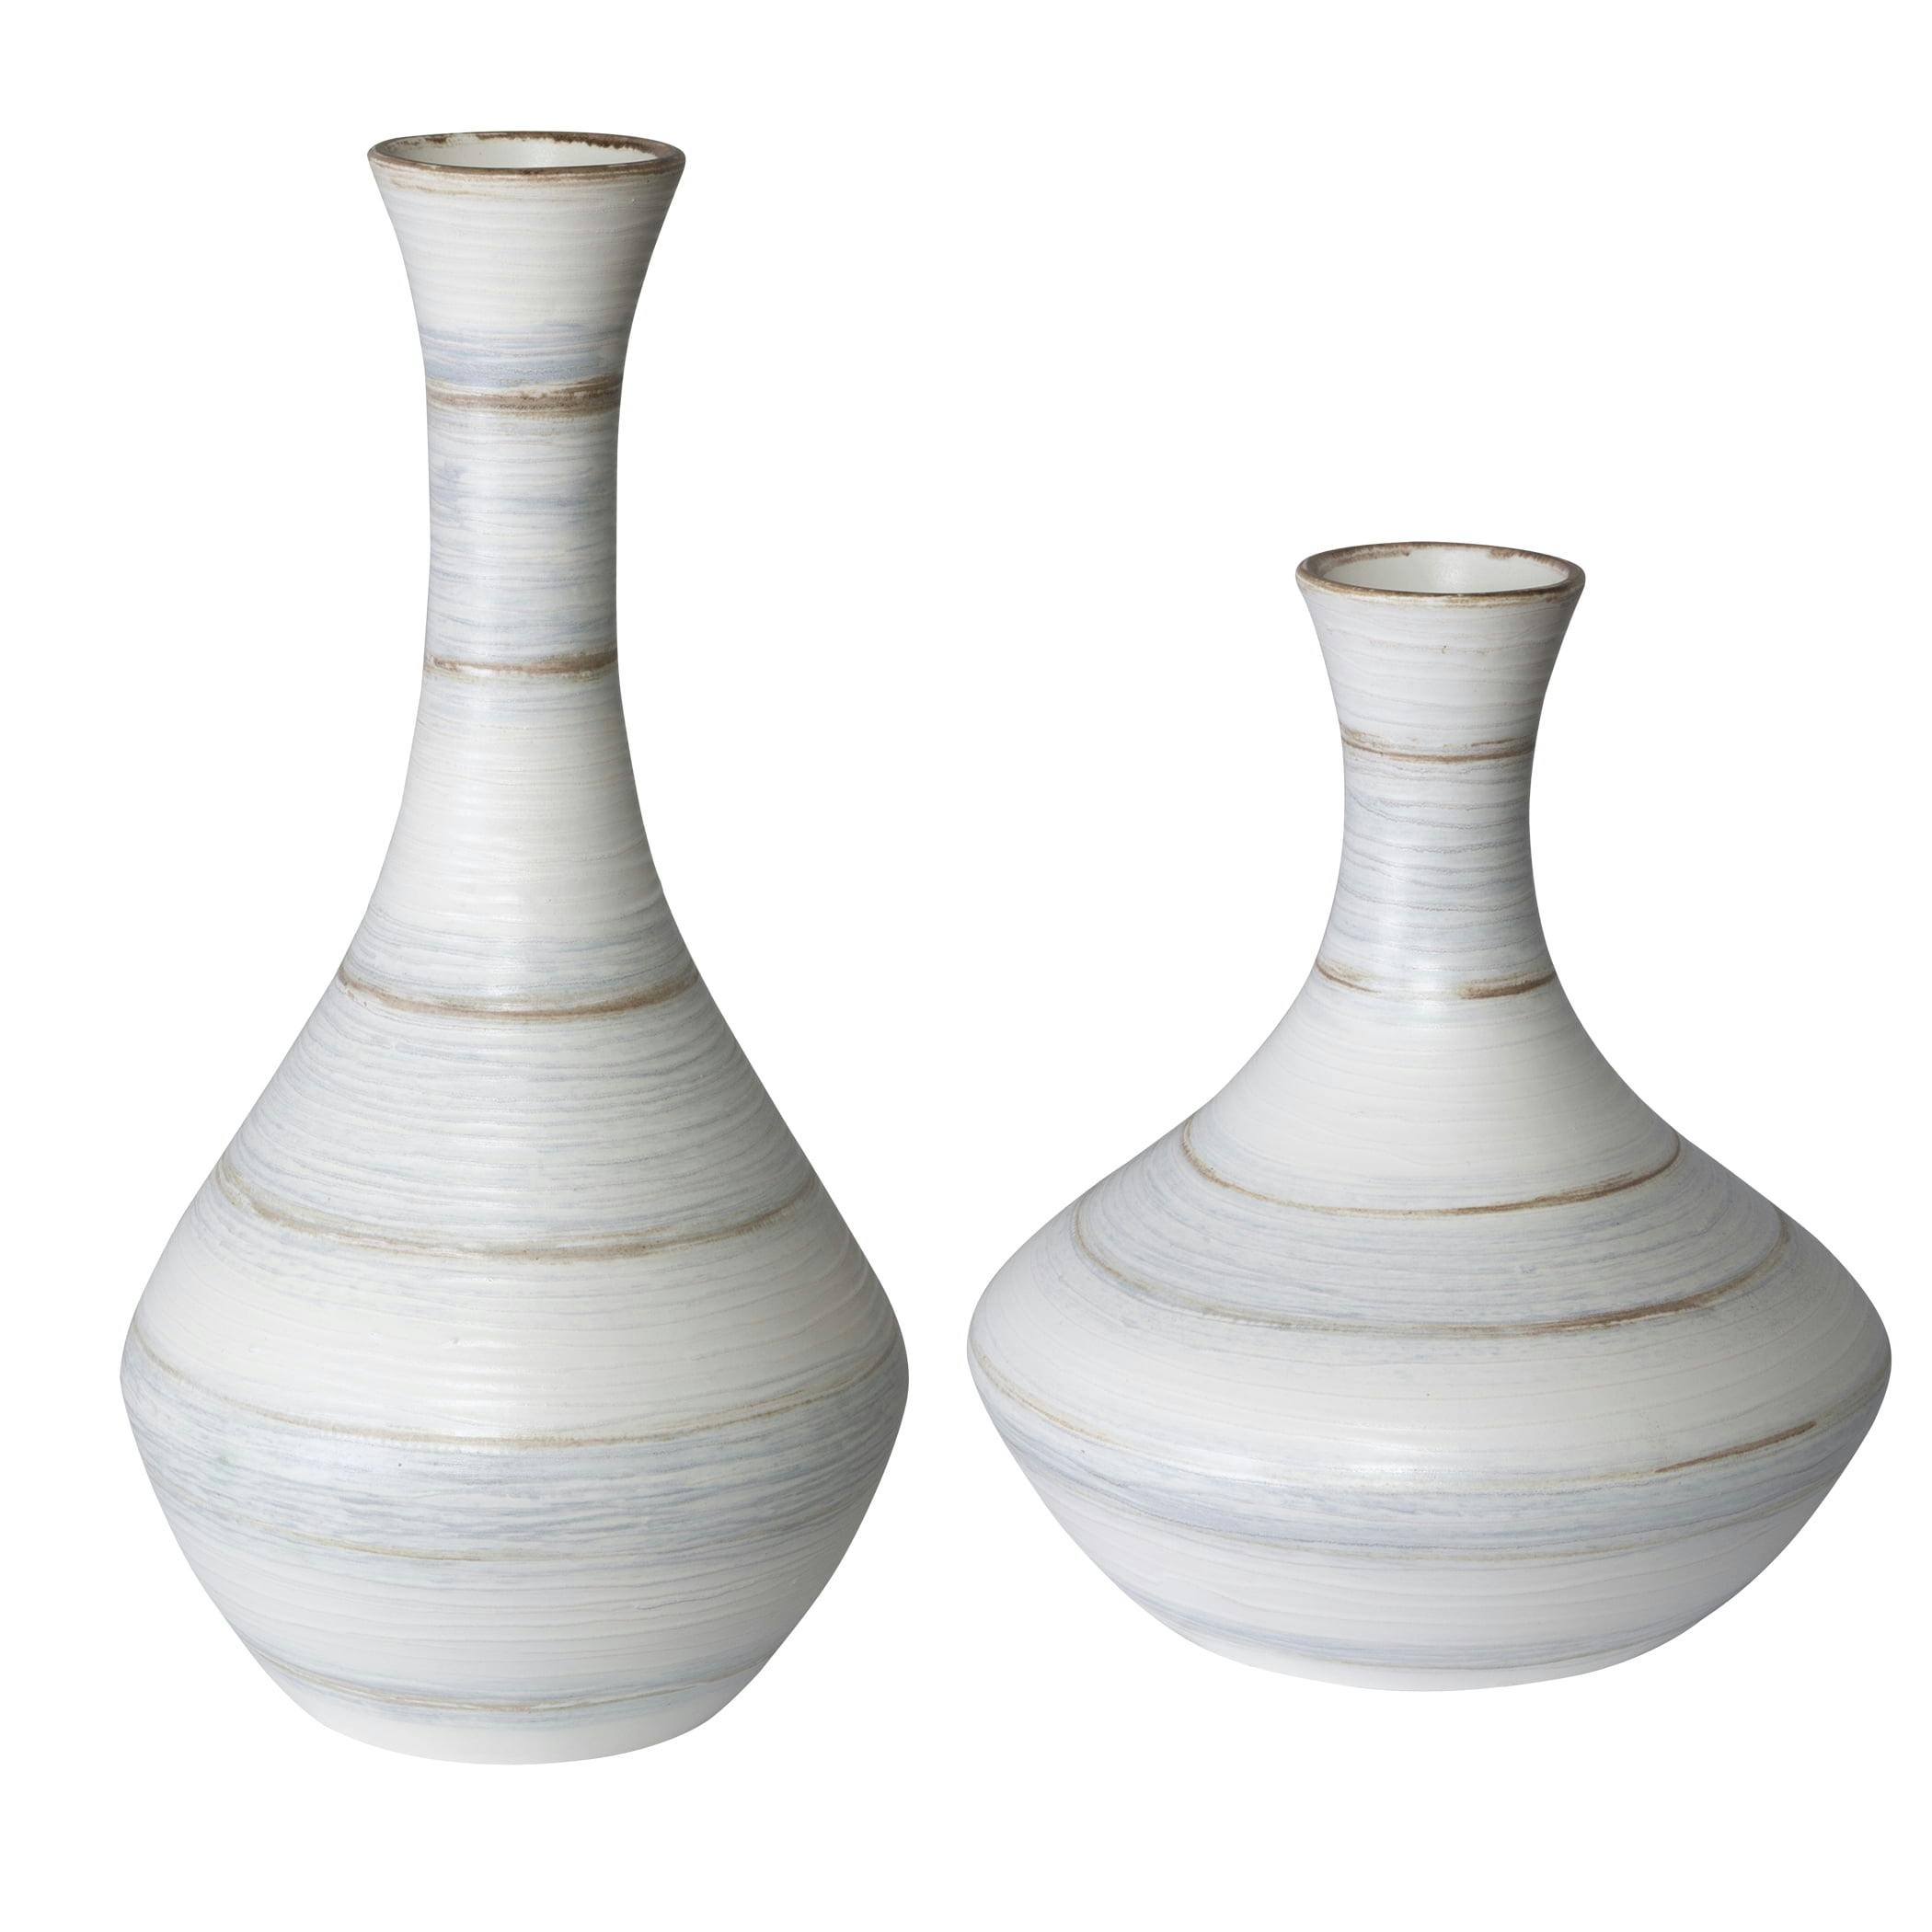 Subtle Aesthetic Ivory, Blue, and Tan Ceramic Vases - Set of 2